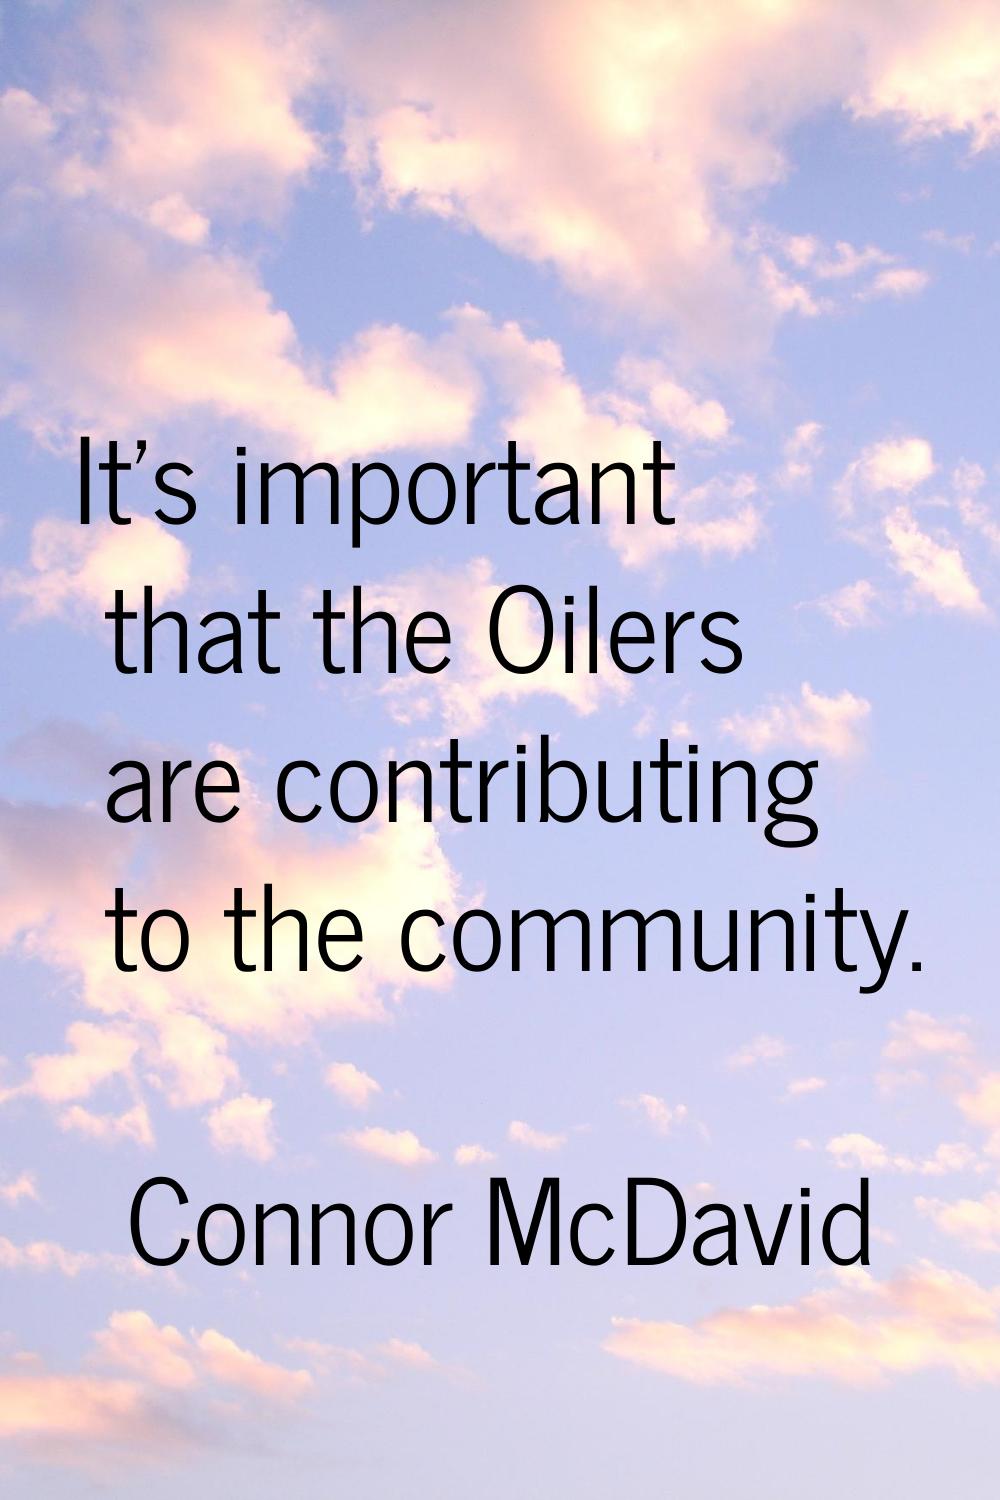 It's important that the Oilers are contributing to the community.